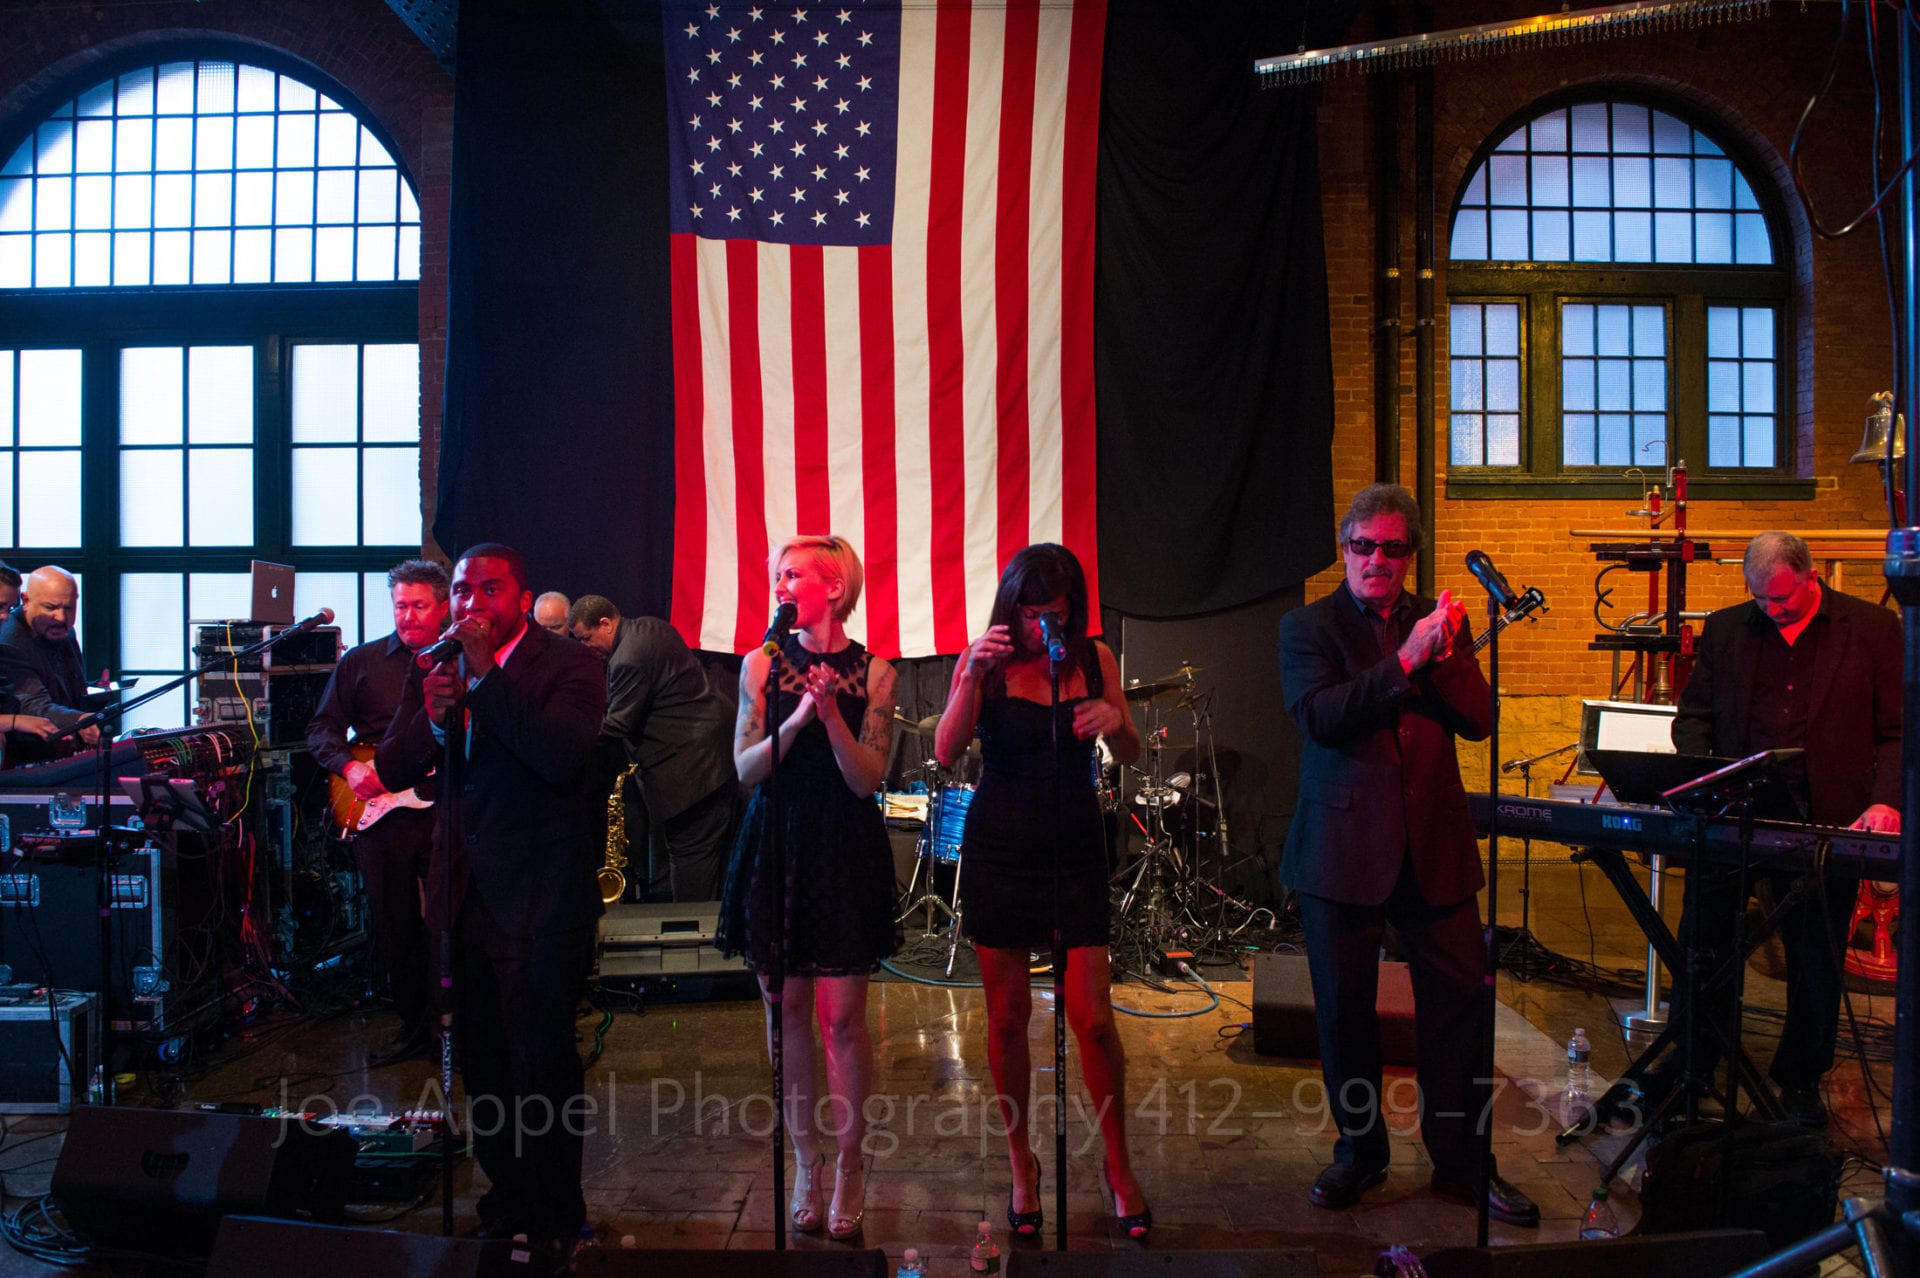 A band plays in front of a large American flag and arched windows at the Heinz History Center.